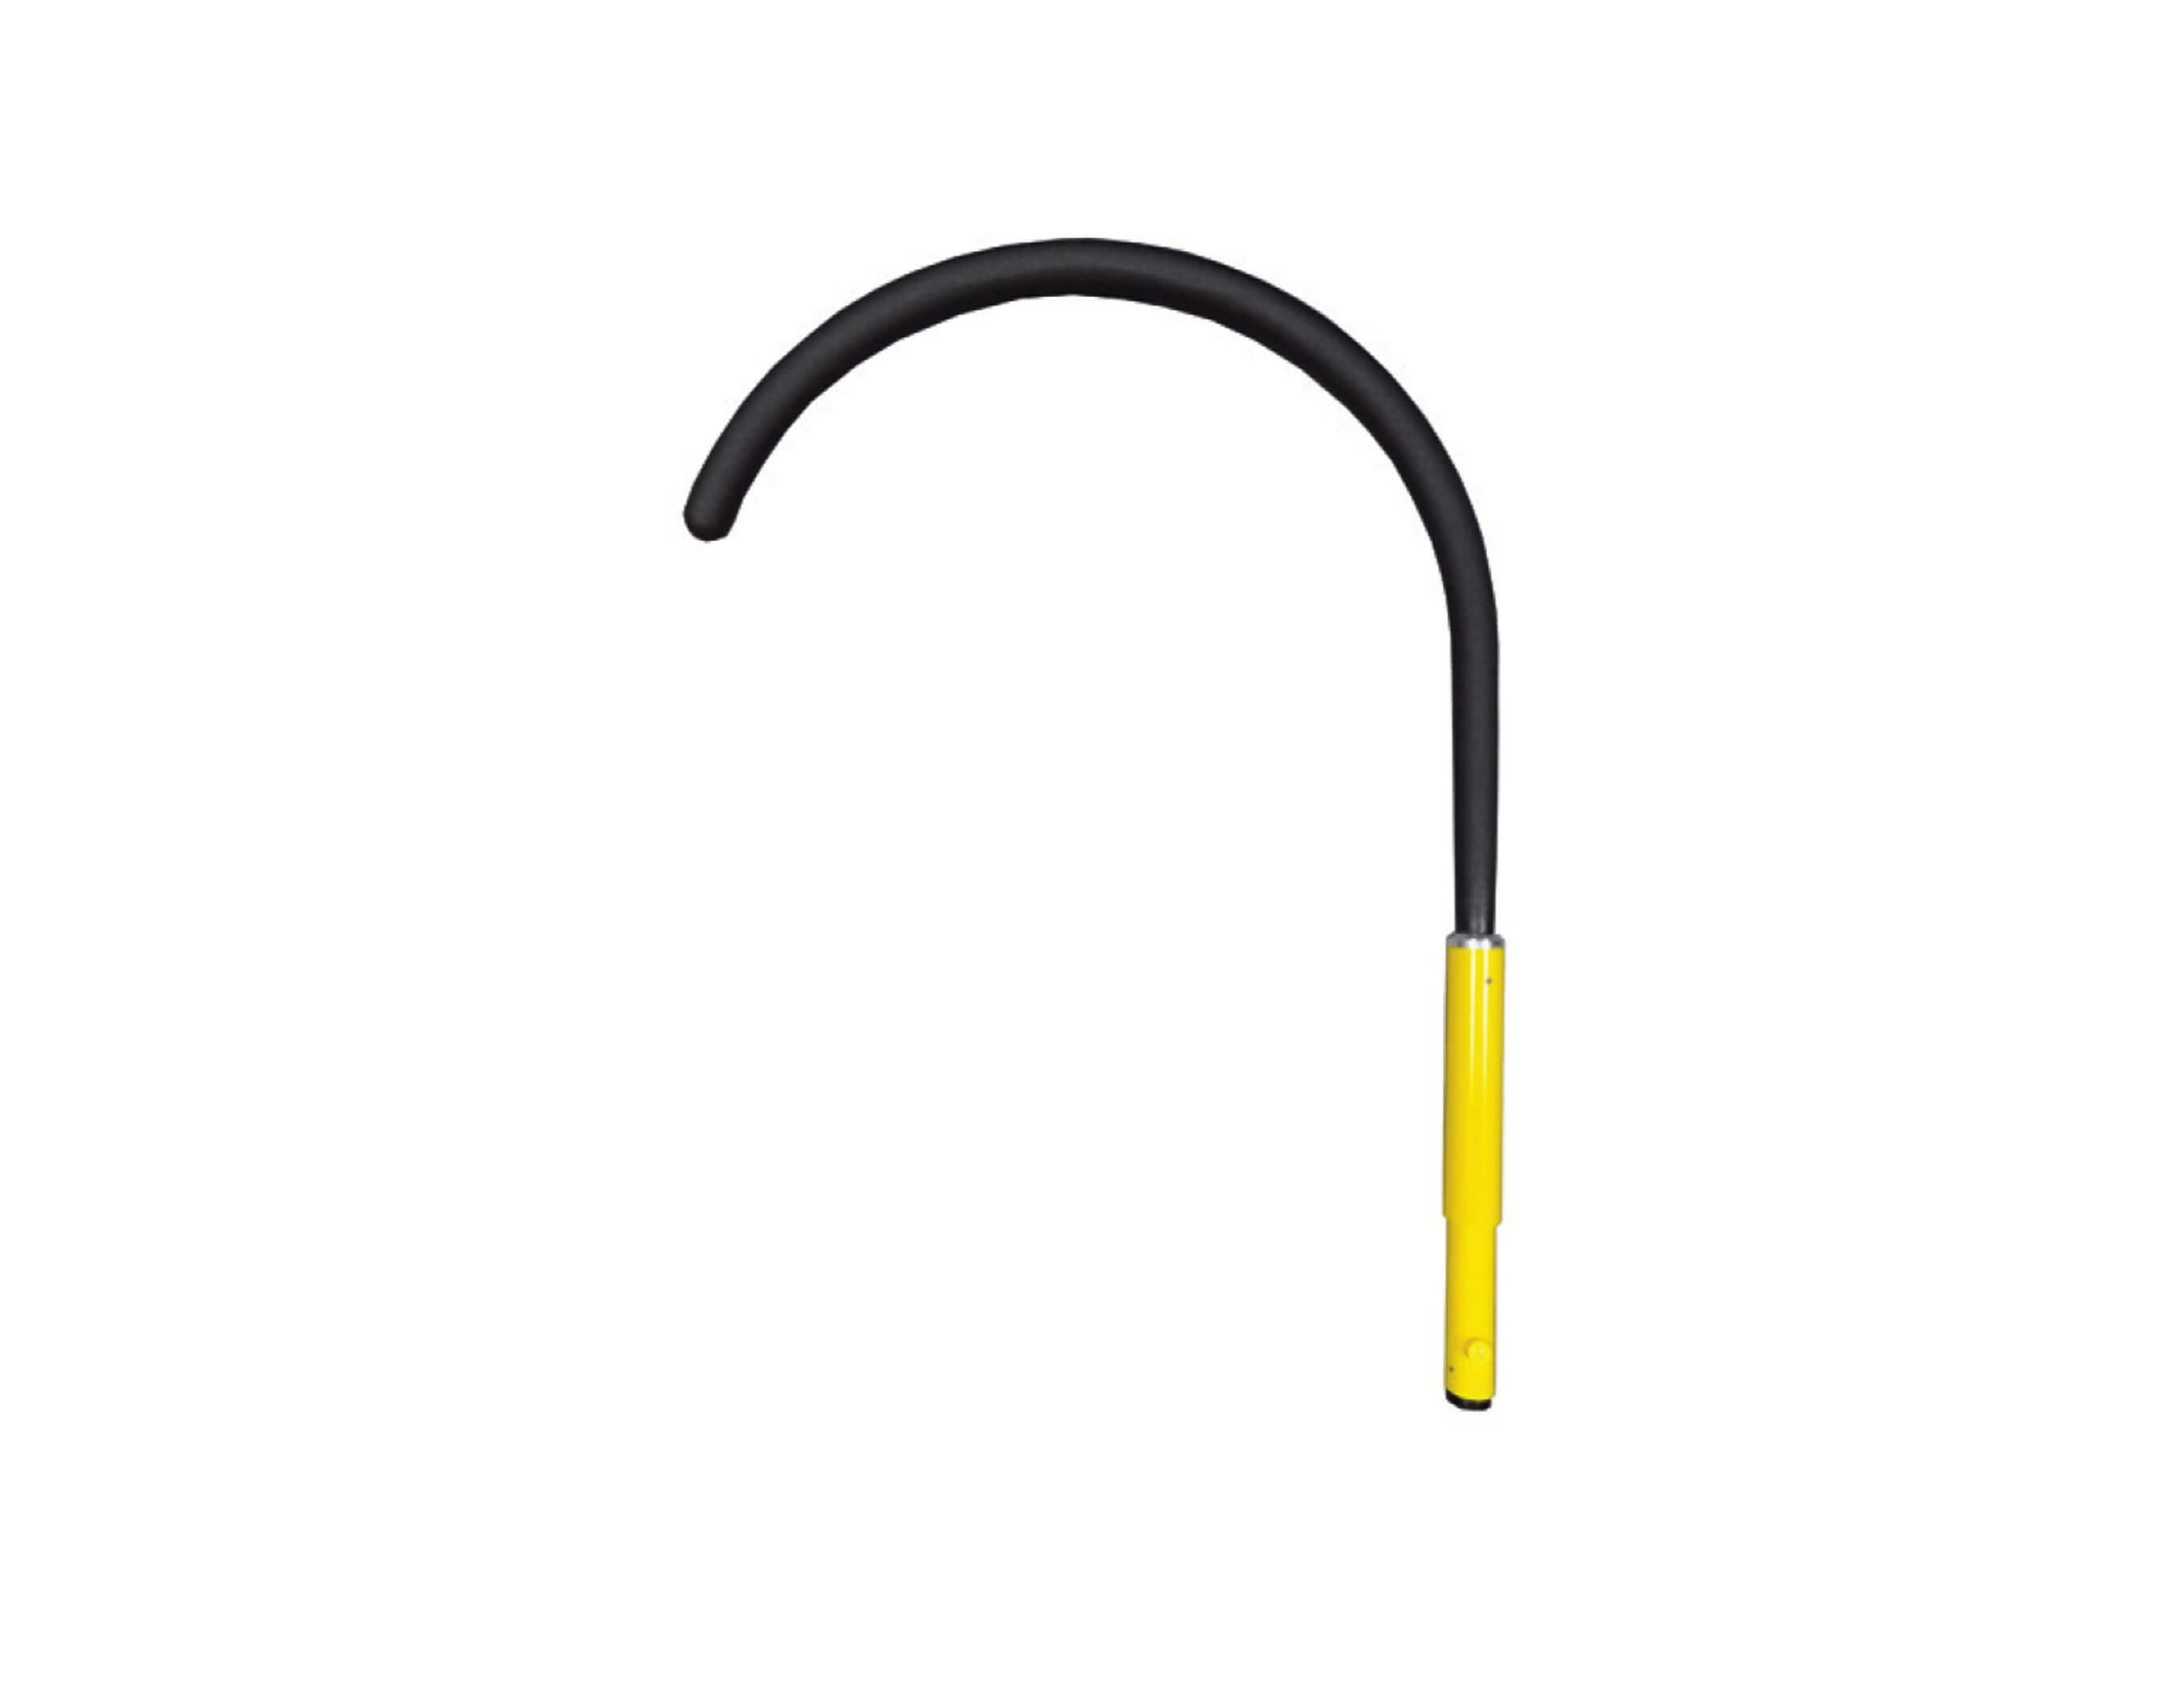 RESCUE HOOK SPLICE END (GOES WITH 899.5526)